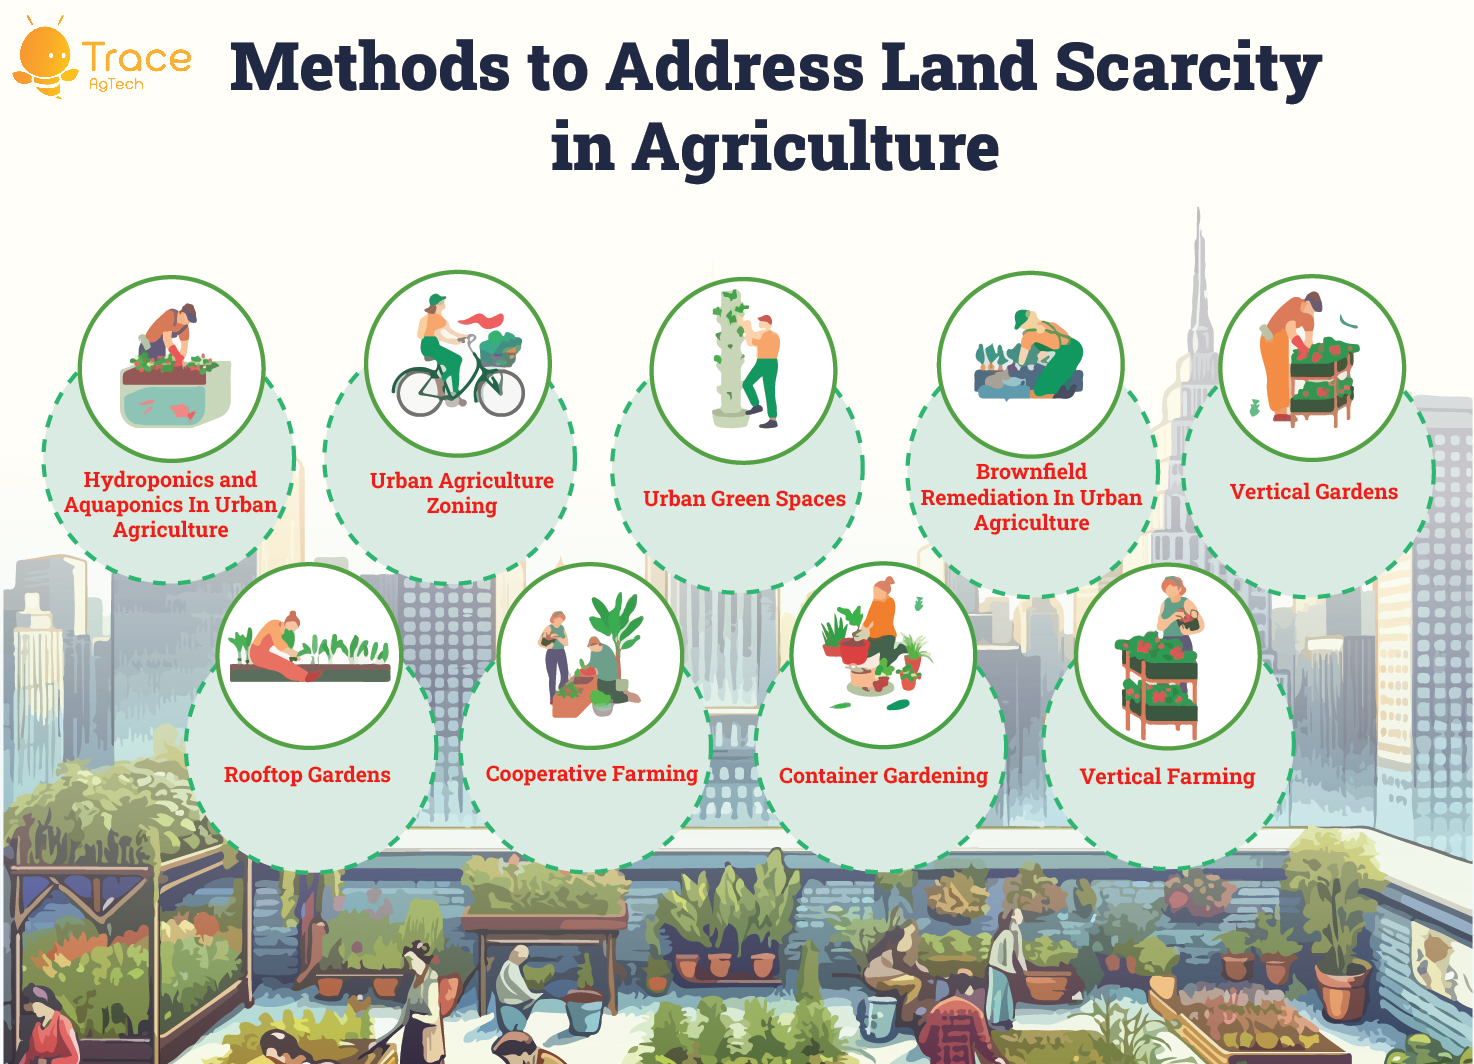 Methods to address land scarcity in agriculture 